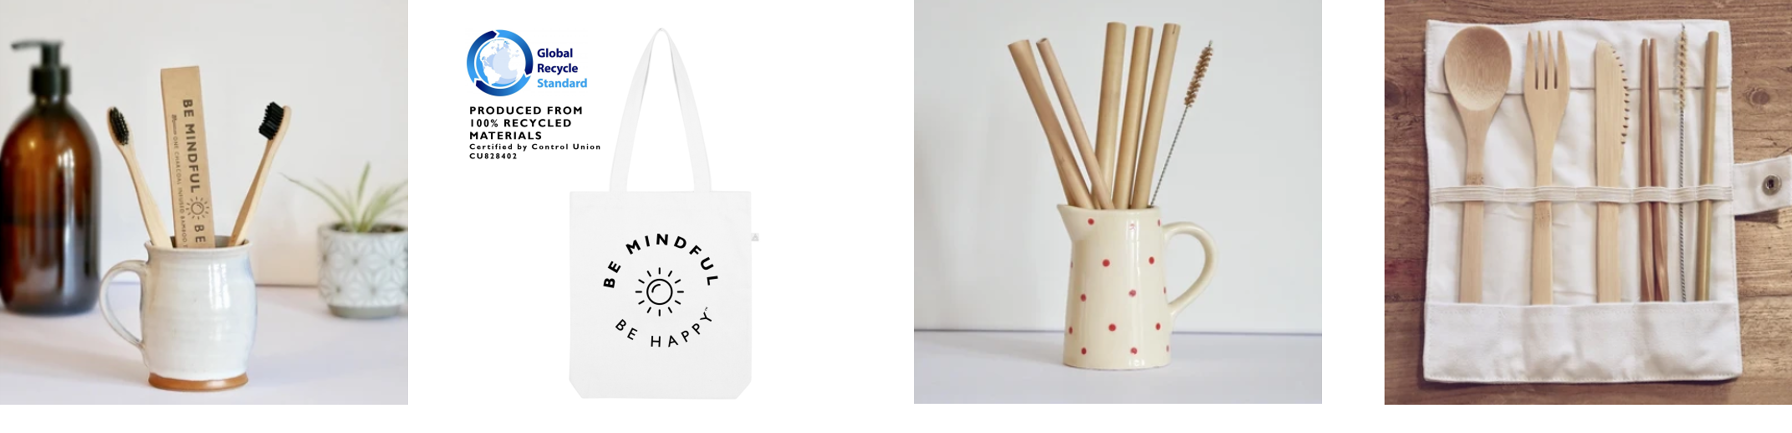 Alternatives to single use plastics. No plastic. Eco friendly sustainable gifts homewares presents products